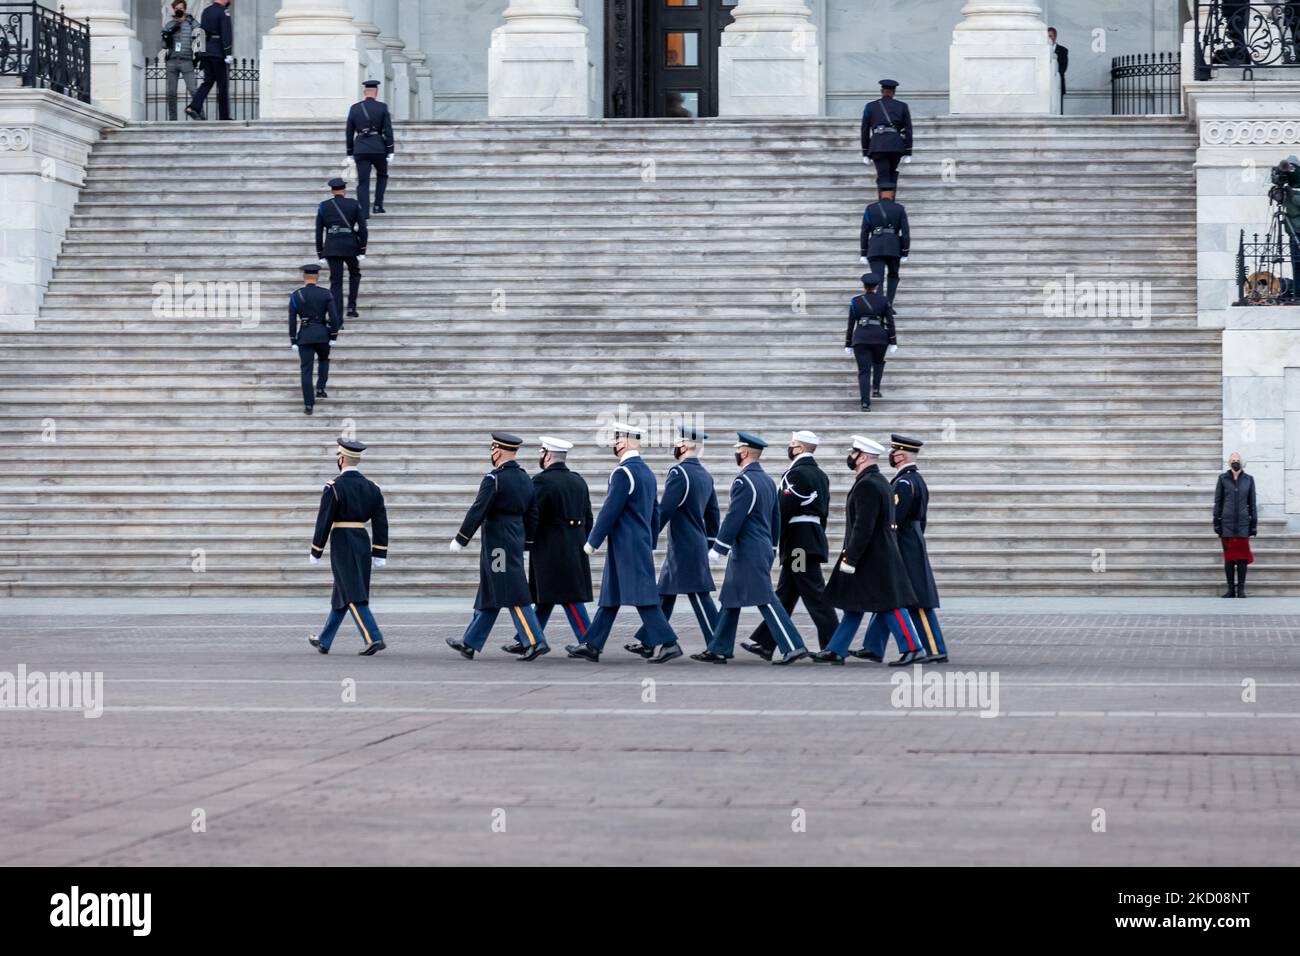 A military honor guard walks in formation after placing the remains of Harry Reid in a waiting hearse for departure from the Capitol, after lying in state in the rotunda. Reid was a Nevada Democrat who served in the House of Representatives from 1983-1987. He was a Senator from 1987-2017, and alternately served as Senate Majority and Minority Leader from 2005-2017. (Photo by Allison Bailey/NurPhoto) Stock Photo